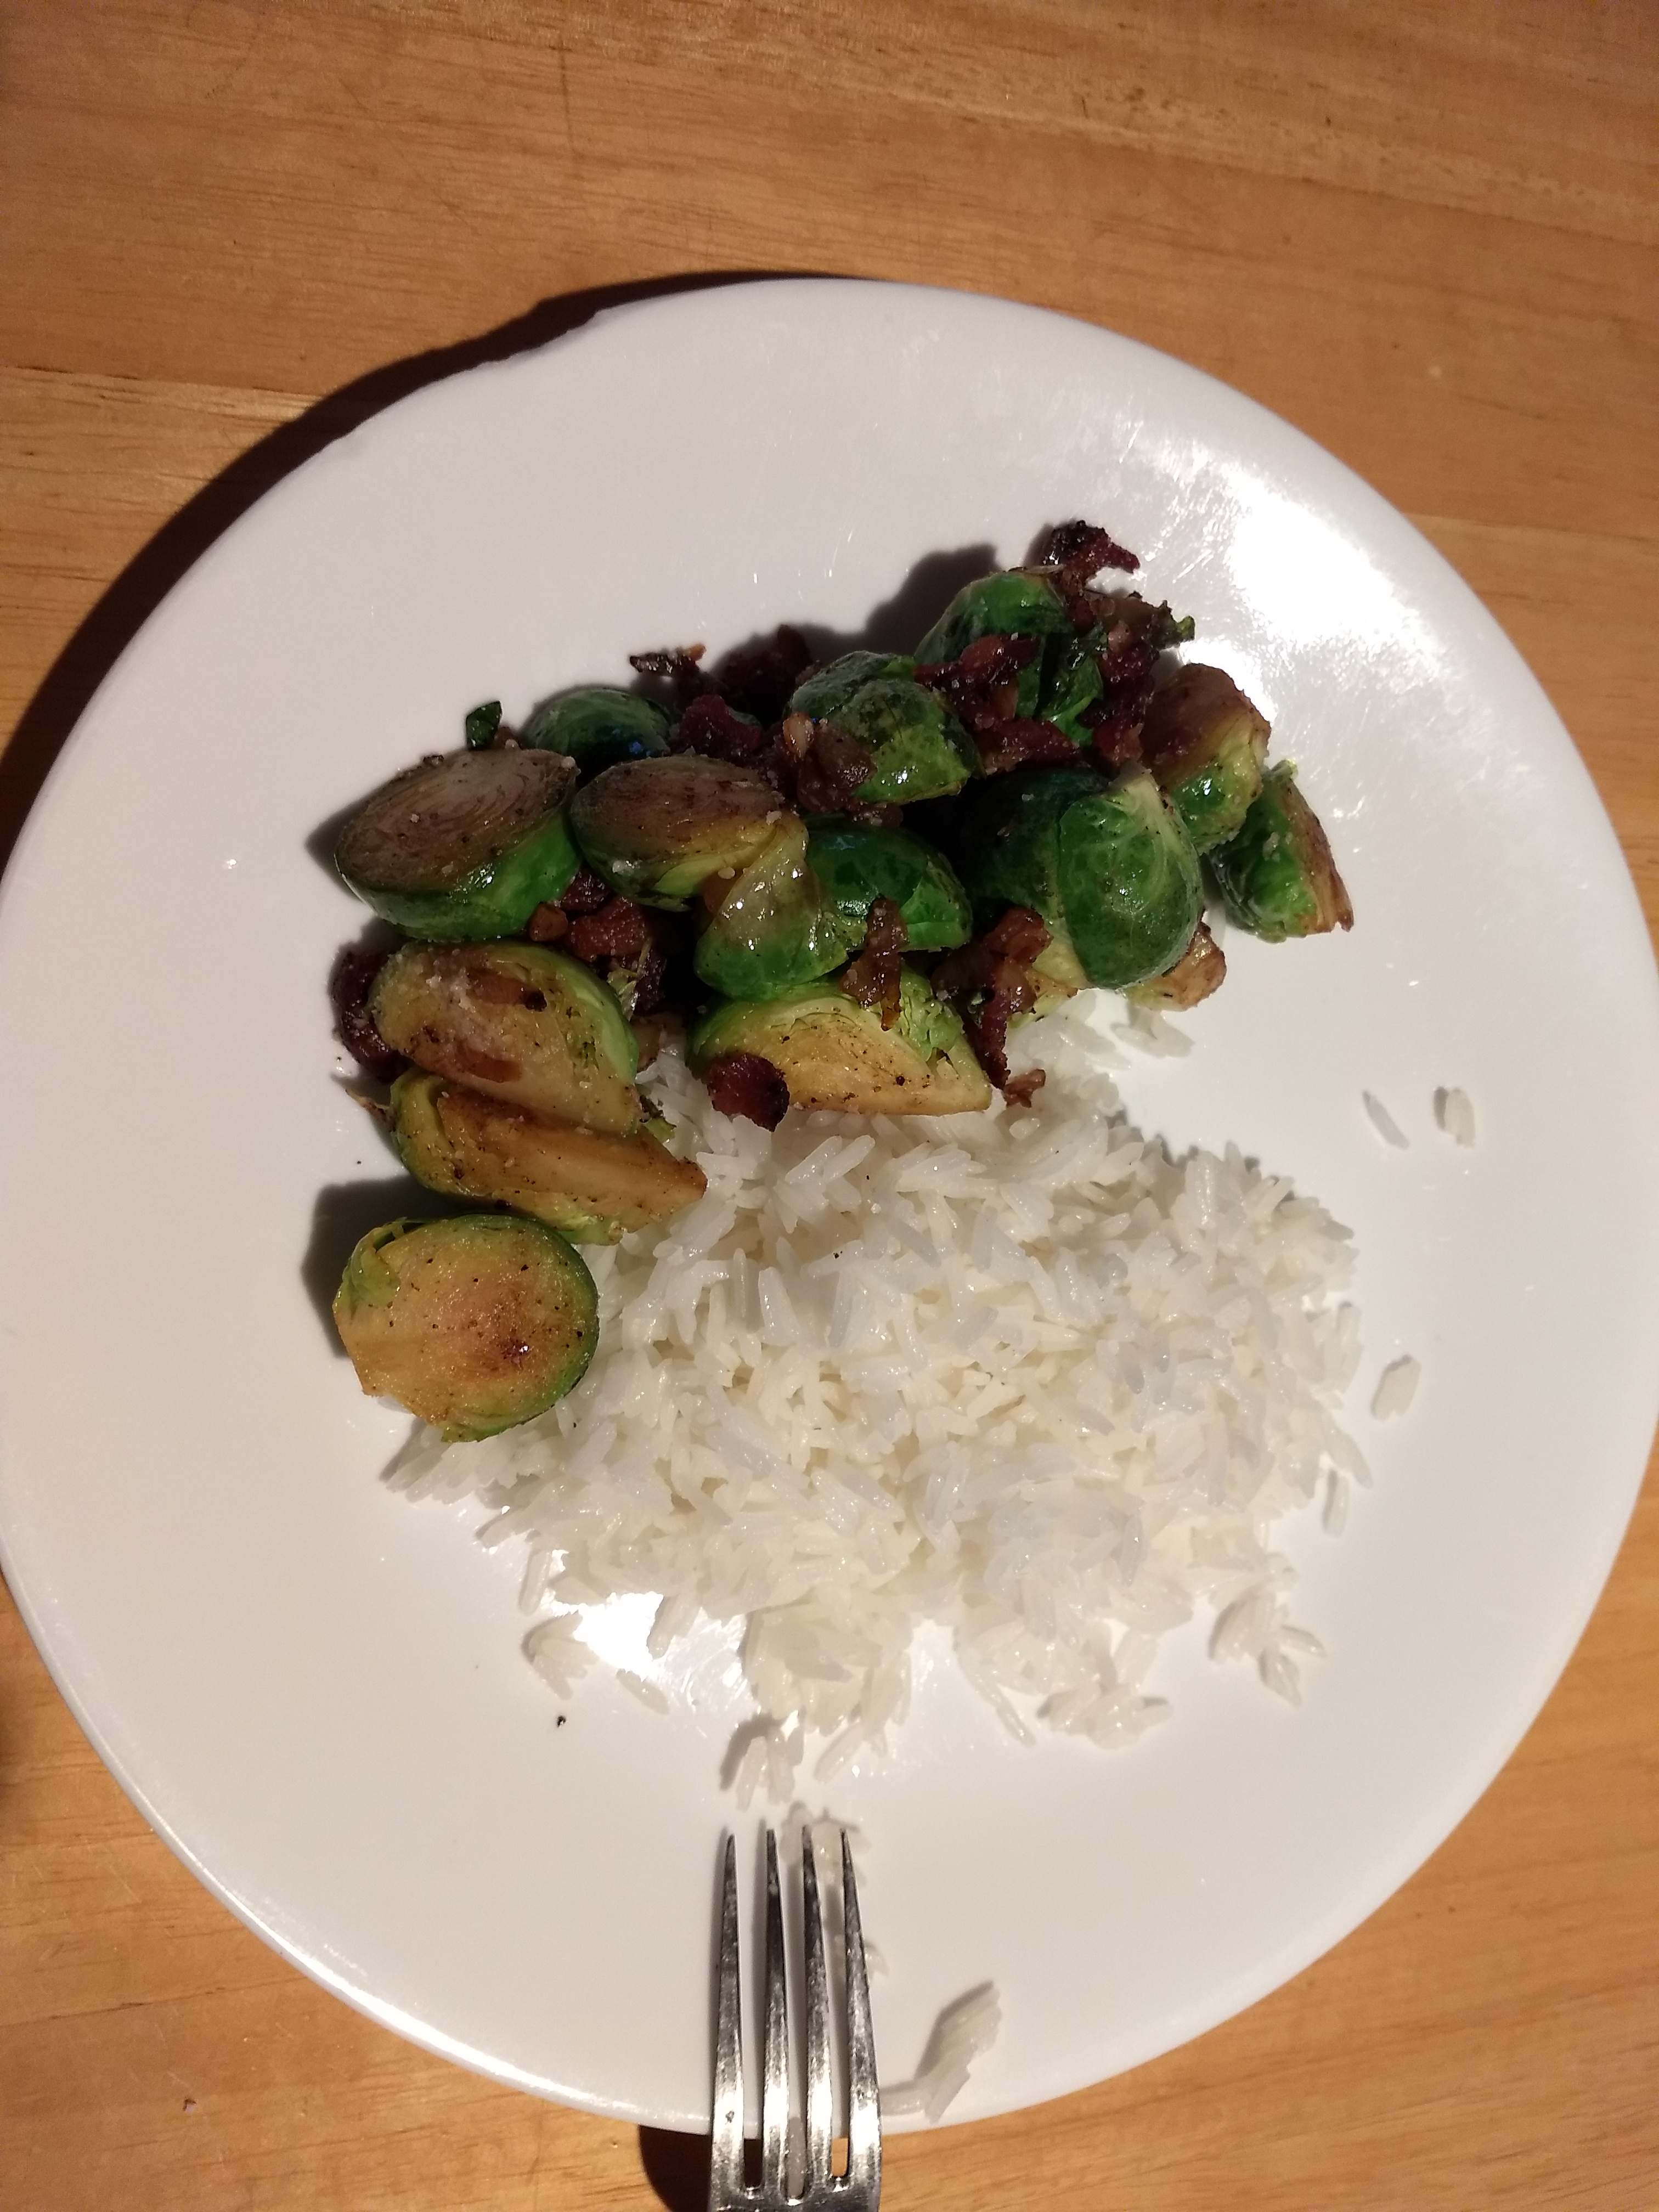 Sauteed Brussels Sprouts with Bacon and Onions 